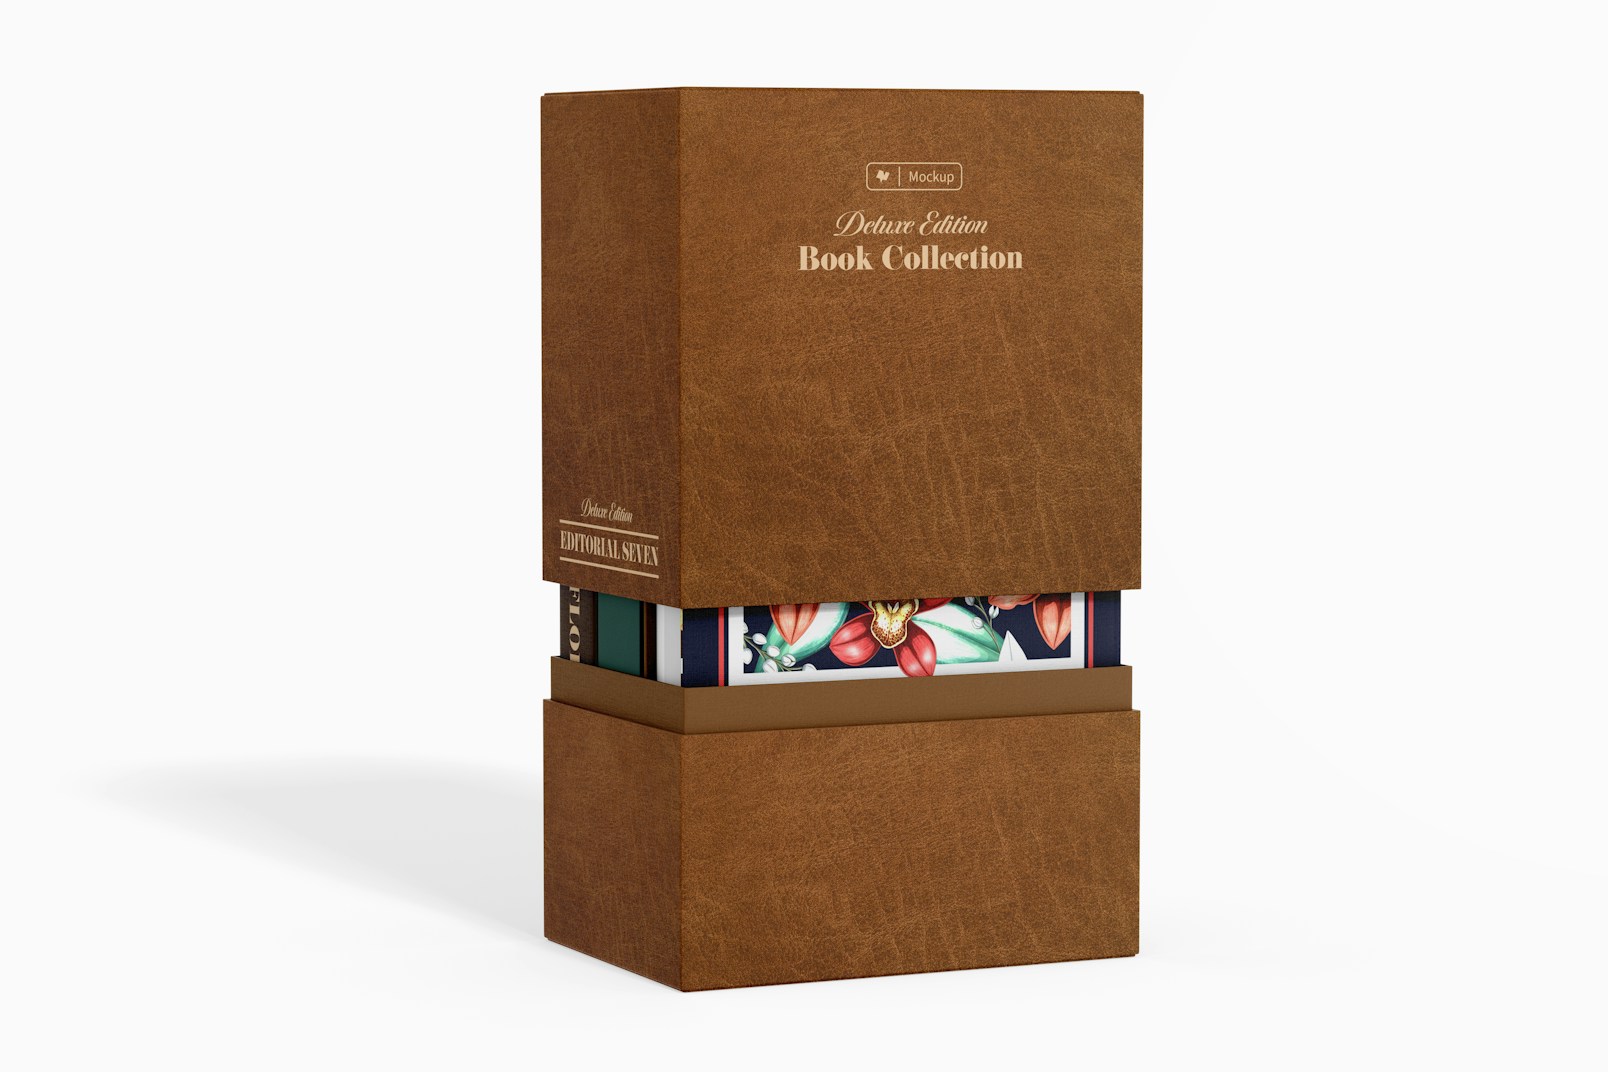 Book Collection Mockup, Opened